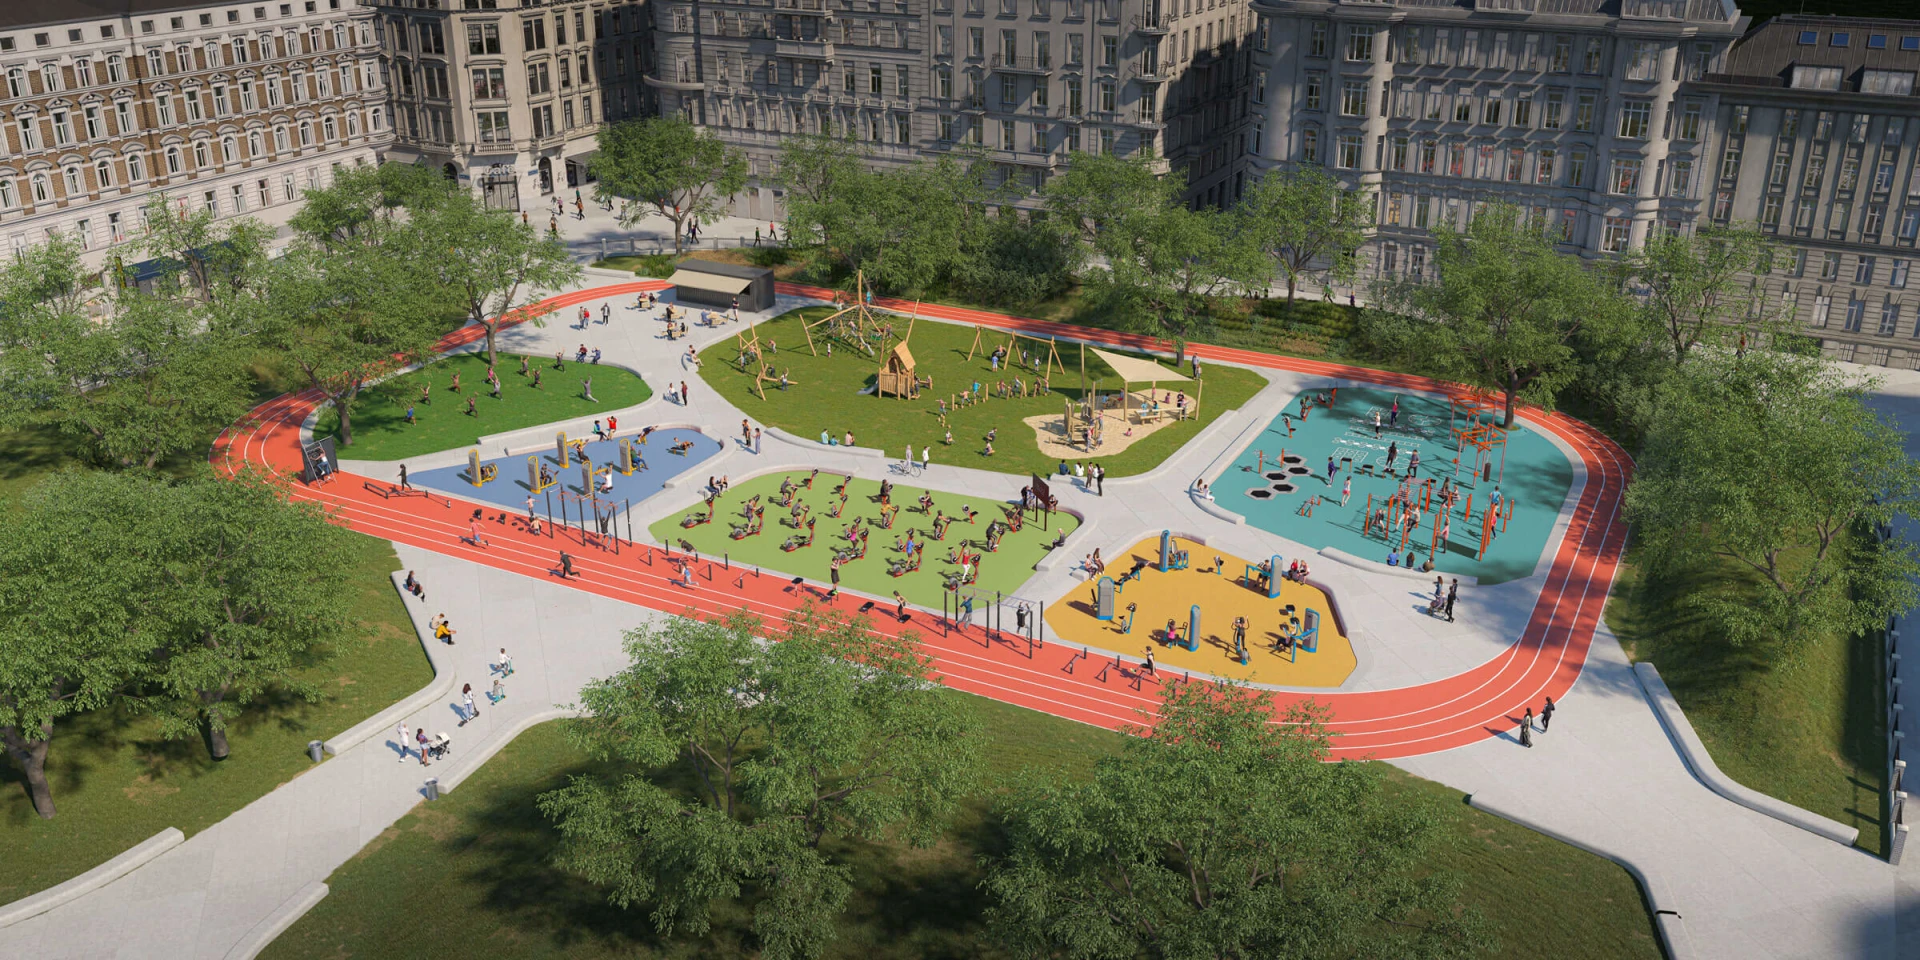 Design idea for an outdoor gym and playground destination area for communities